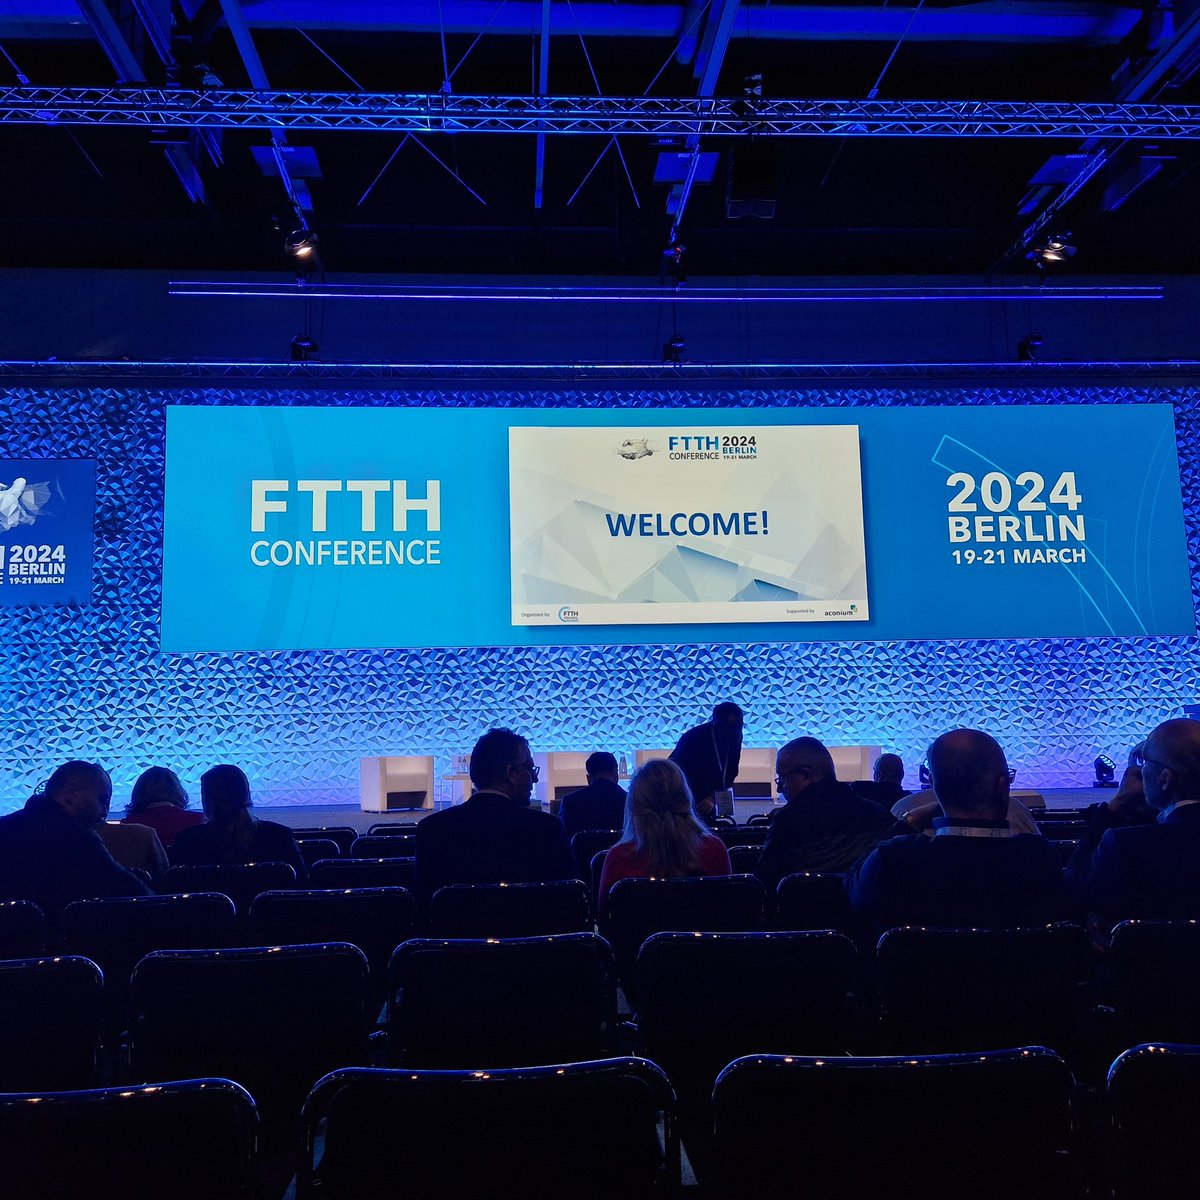 All set for the FTTH  conference kick off here in Berlin #ftth24 @SonalakeHQ